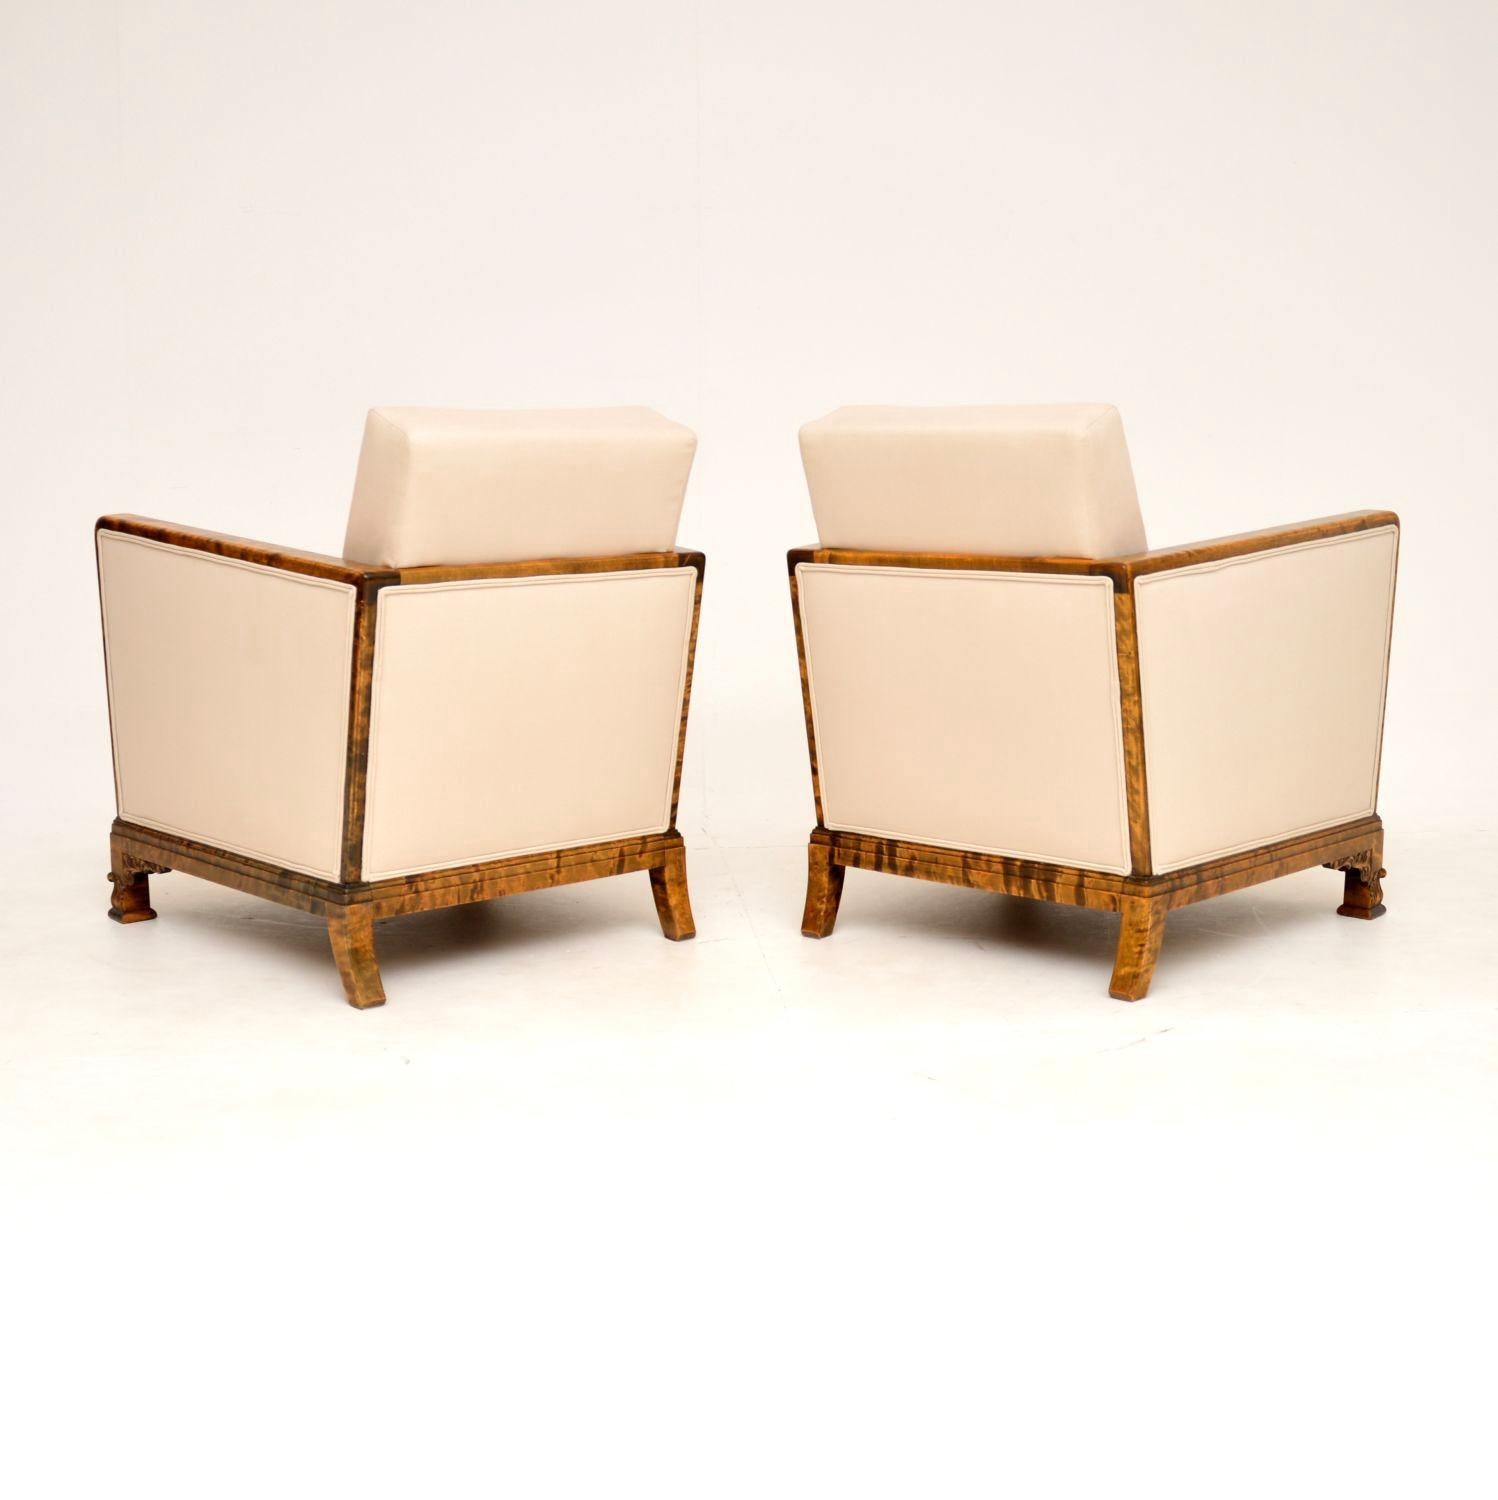 Early 20th Century Pair of Art Deco Swedish Satin Birch Armchairs For Sale